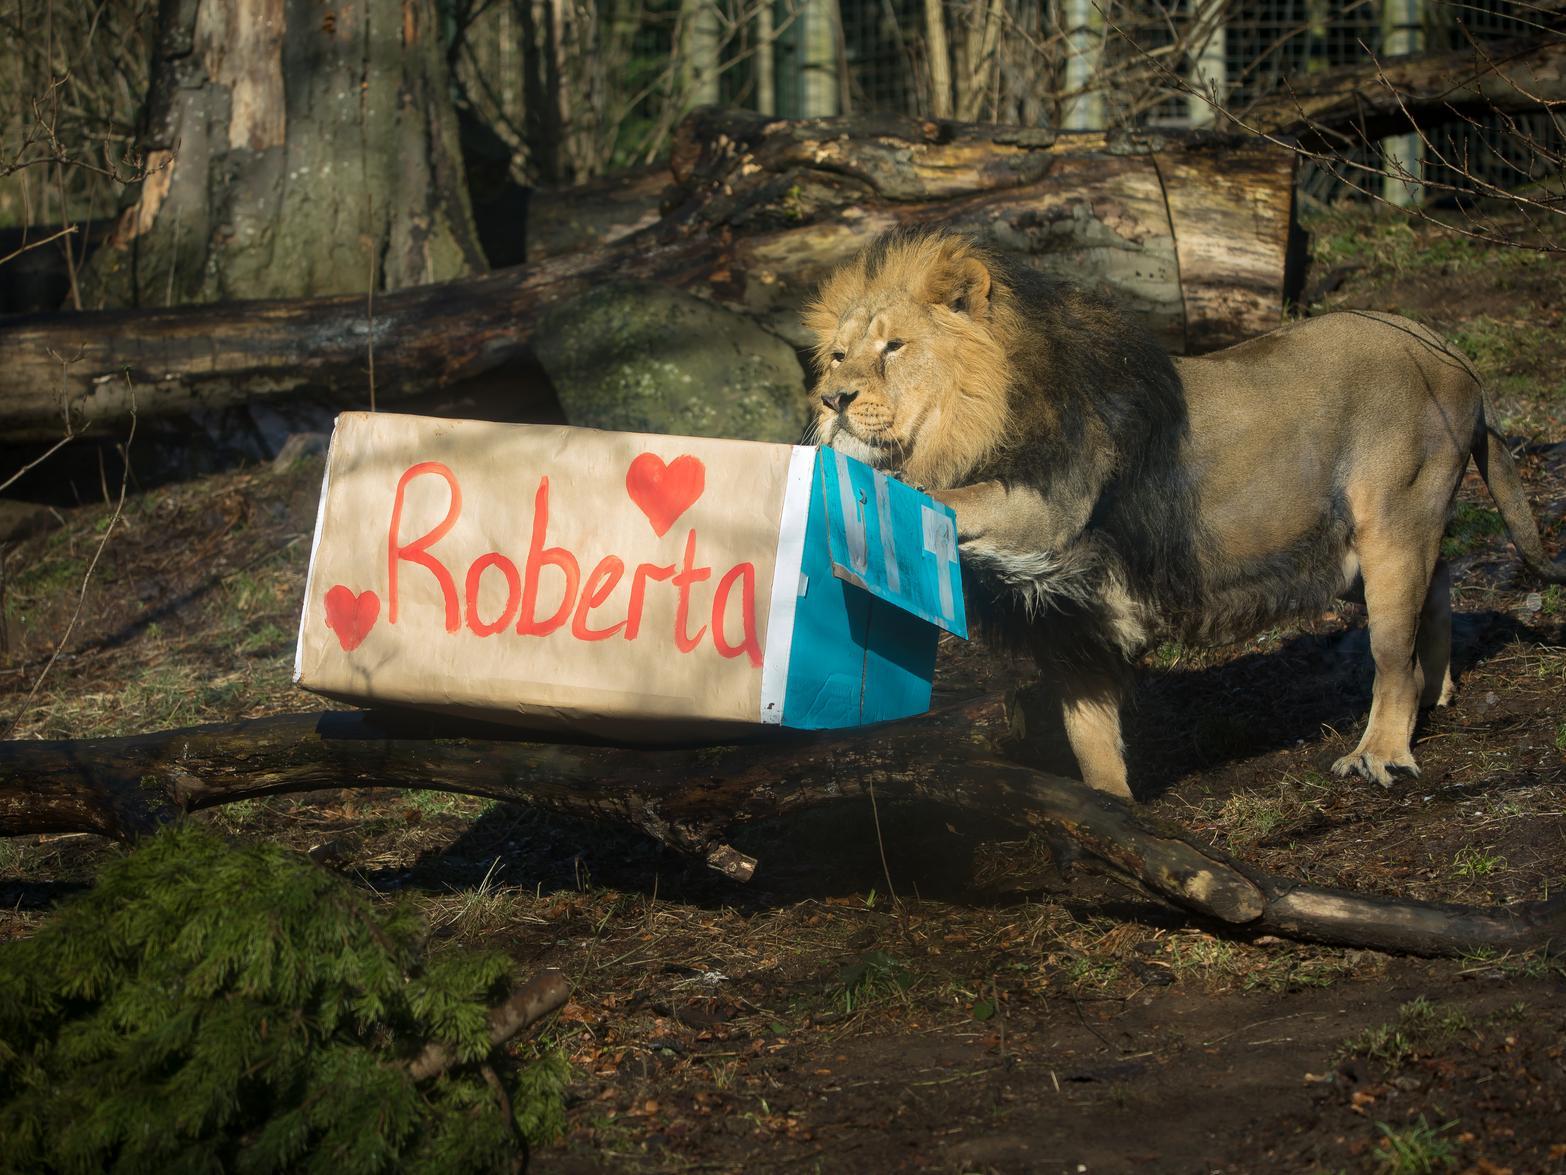 Roberta the lioness was selected to be paired with resident Edinburgh male Jayendra through the European Endangered Species Programme, which is run by experts at other zoos across Europe. RZSS/Sian Addison